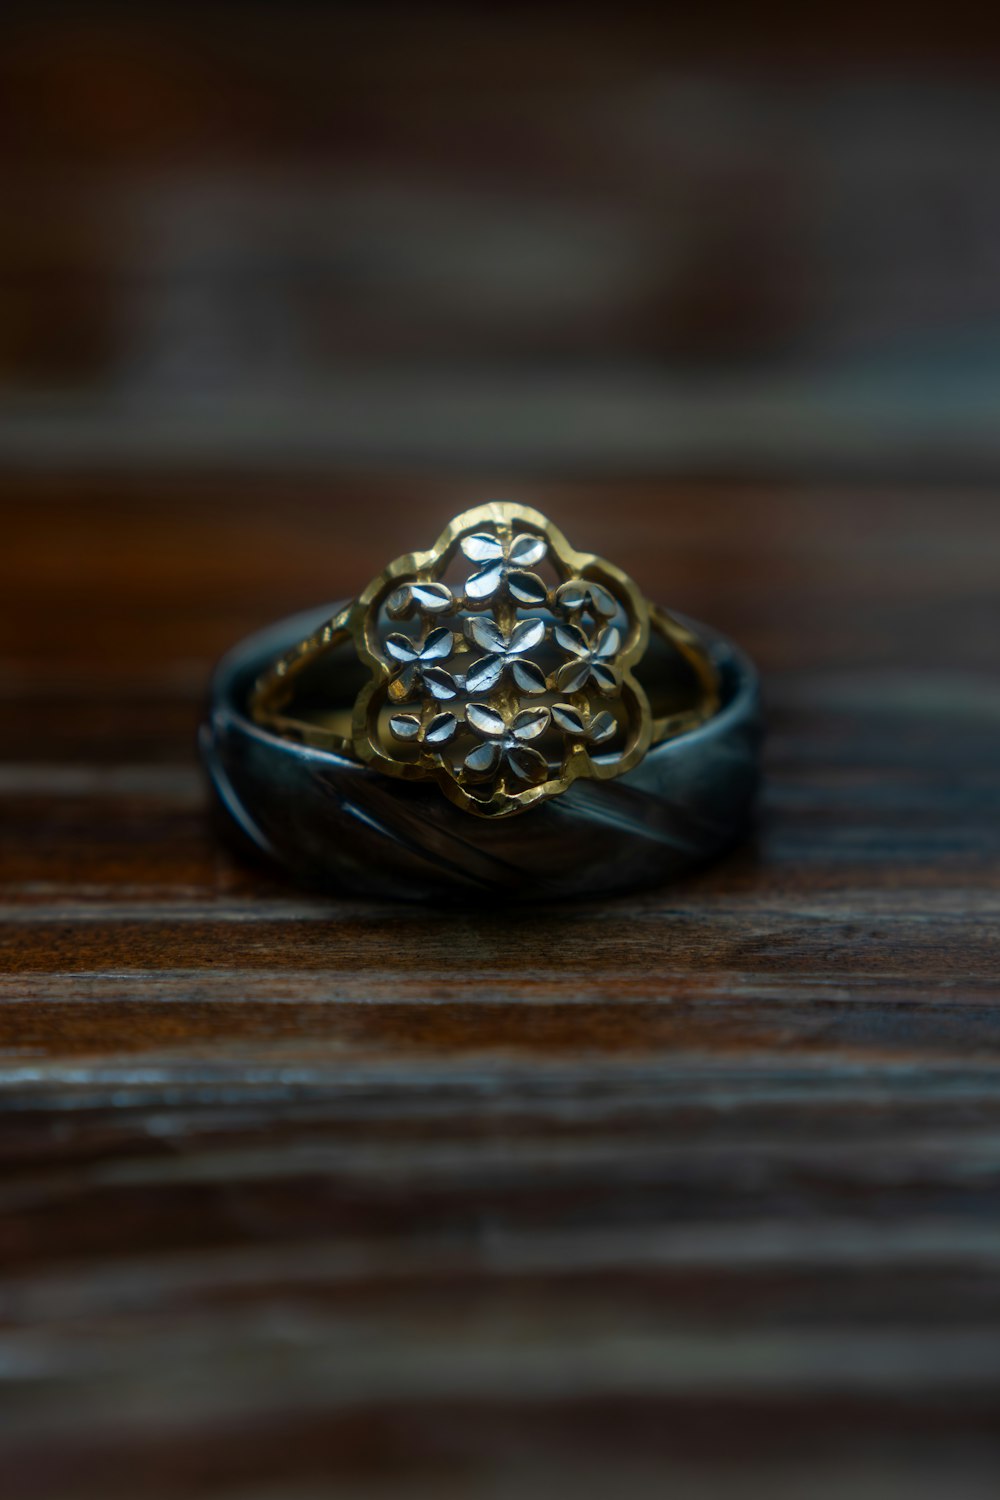 a close up of a ring on a wooden surface